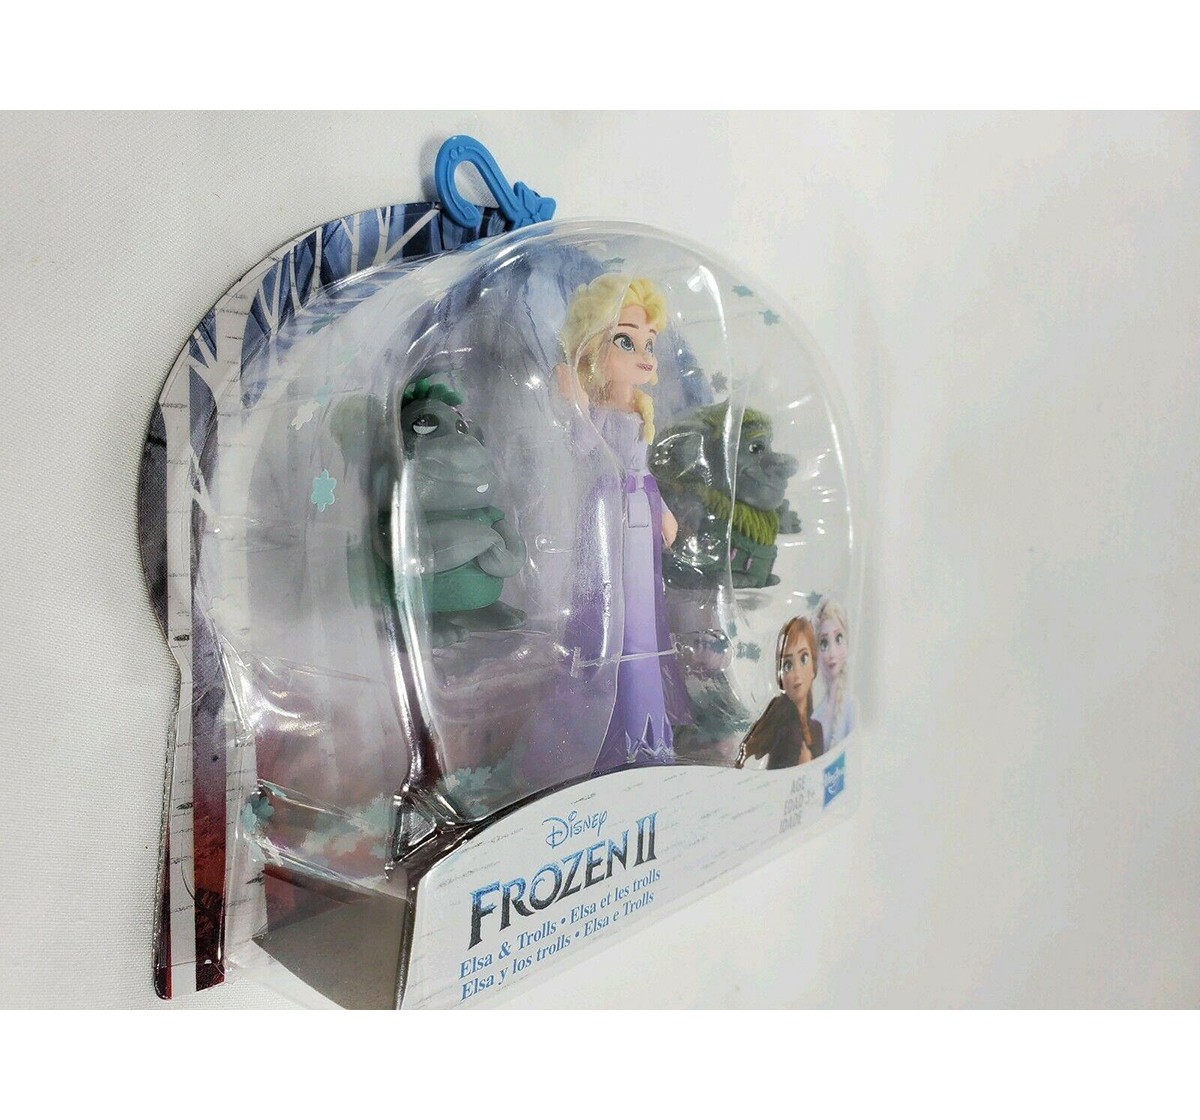 Disney Frozen 2 Elsa Small Doll And Friends Assorted Dolls & Accessories for age 3Y+ 